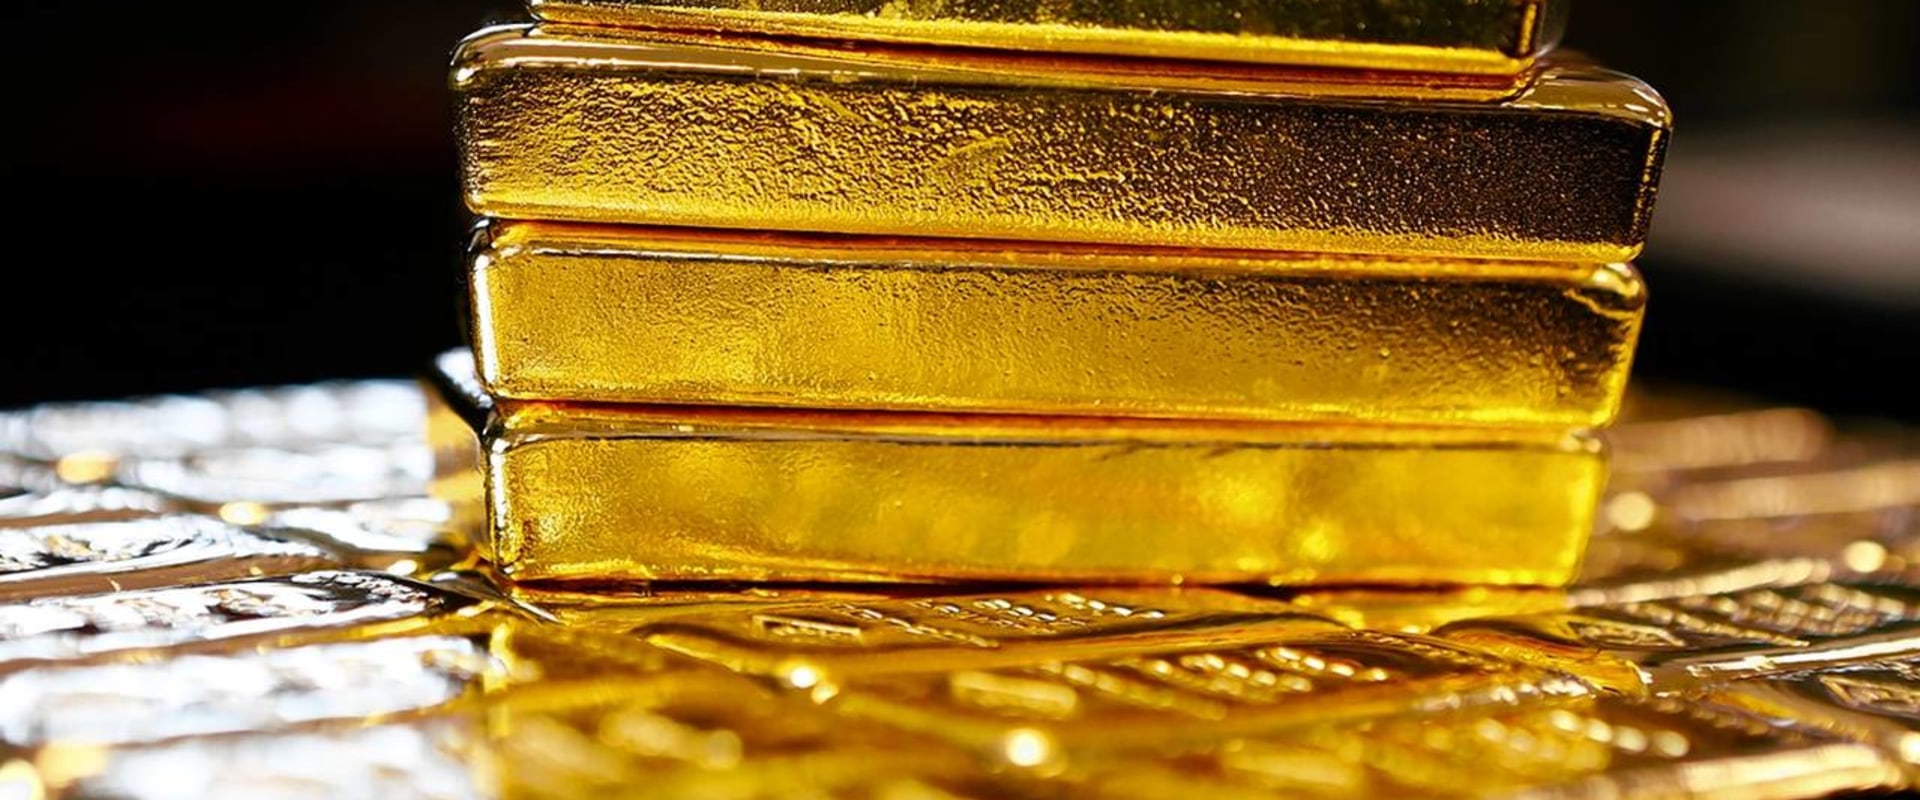 Can you store precious metals in a roth ira?